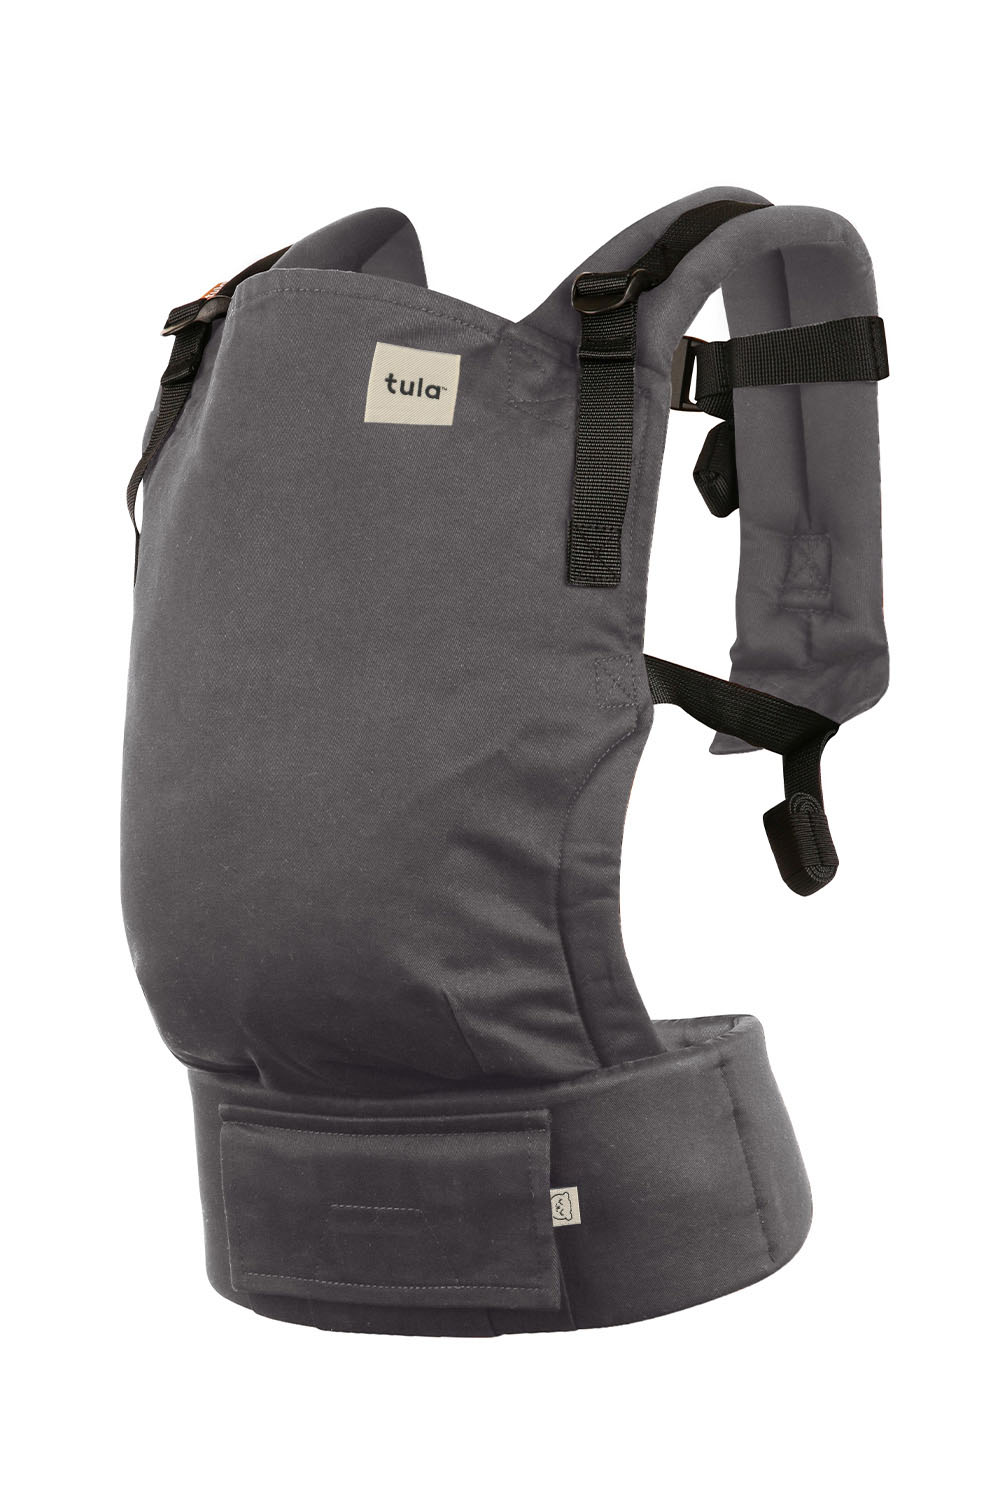 Baby Tula Baby Carrier – Baby Tula US